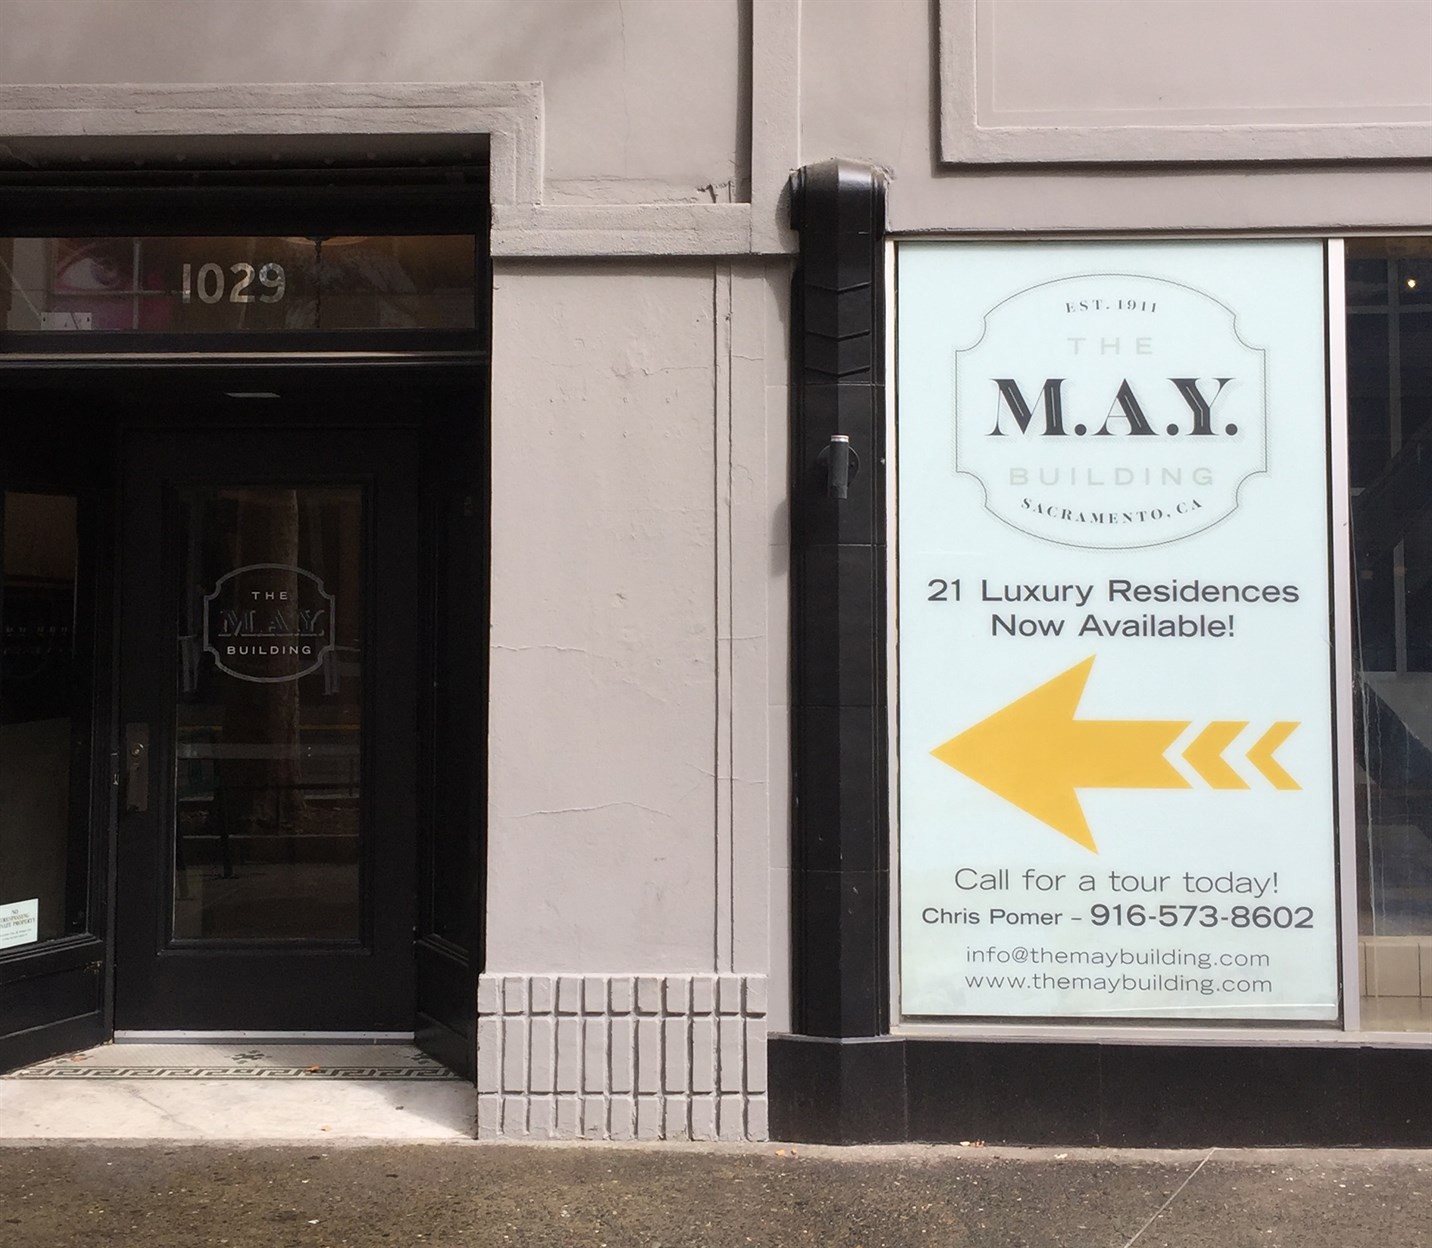 the m.a.y. building signs